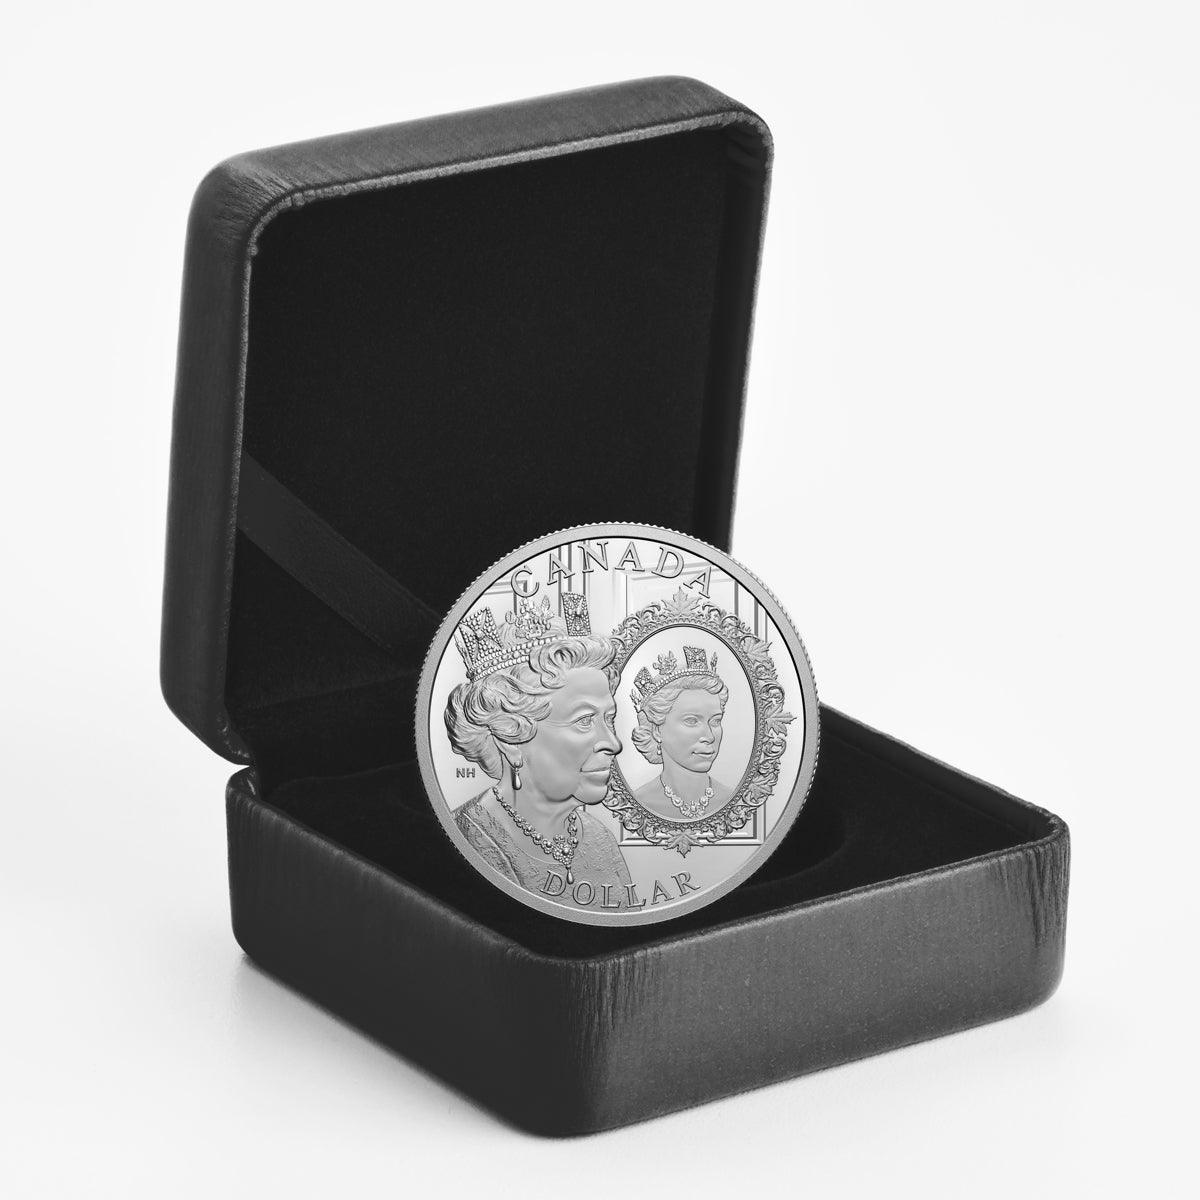 PLATINUM JUBILEE OF HER MAJESTY QUEEN ELIZABETH II Special Edition Silver Coin 1$ Canada 2022 - PARTHAVA COIN